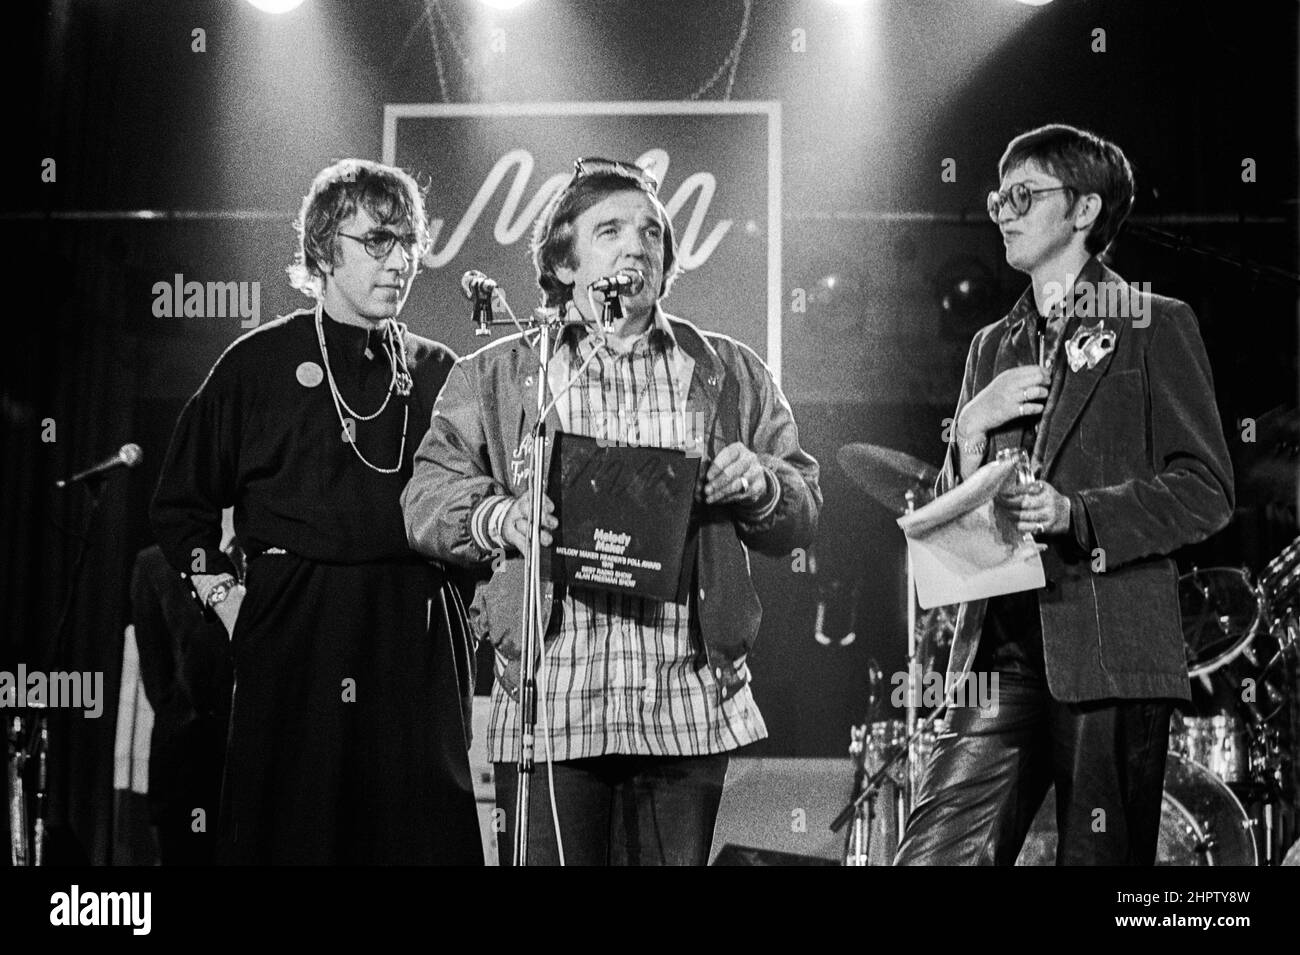 Australian DJ Alan 'Fluff' Freeman, MBE receiving an award from Peter Cook (wearing a dress) and Janet Street-Porter at a Melody Maker poll awards ceremony in London in 1979. Stock Photo